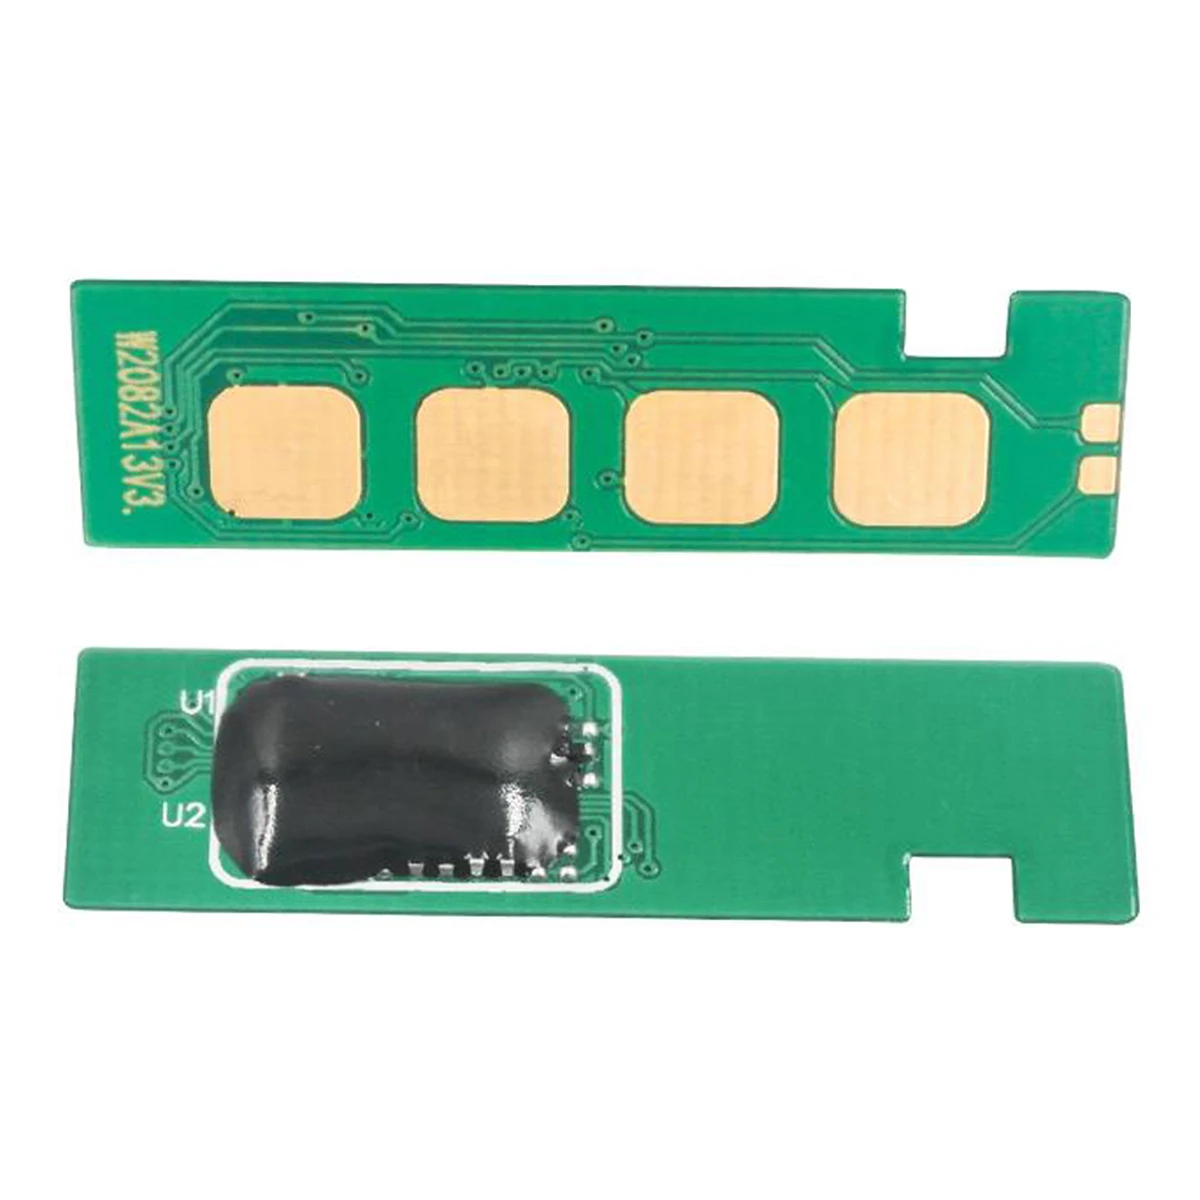 

W2060A W2070A W2071A W2072A W2073A W2090A Toner Cartridge Chip for HP Color Laser 150 150a 150w 150nw MFP 178 178nw 179 179fnw